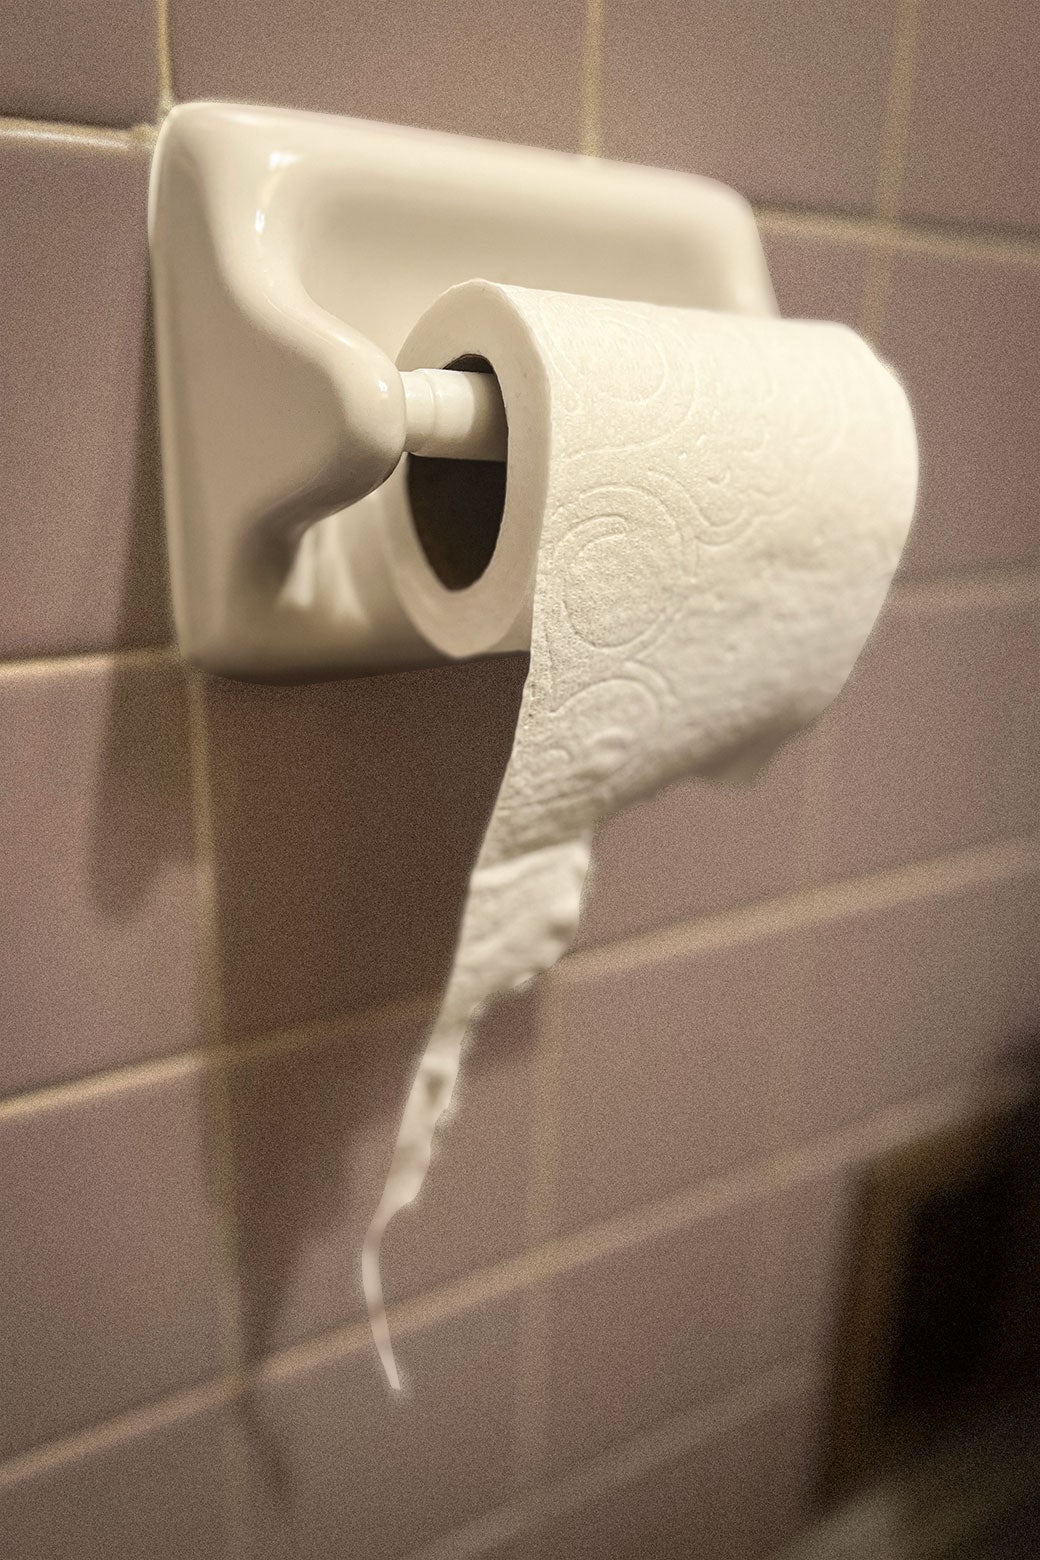 A hanging roll of toilet paper has a weird sideways string from an incomplete tear. 